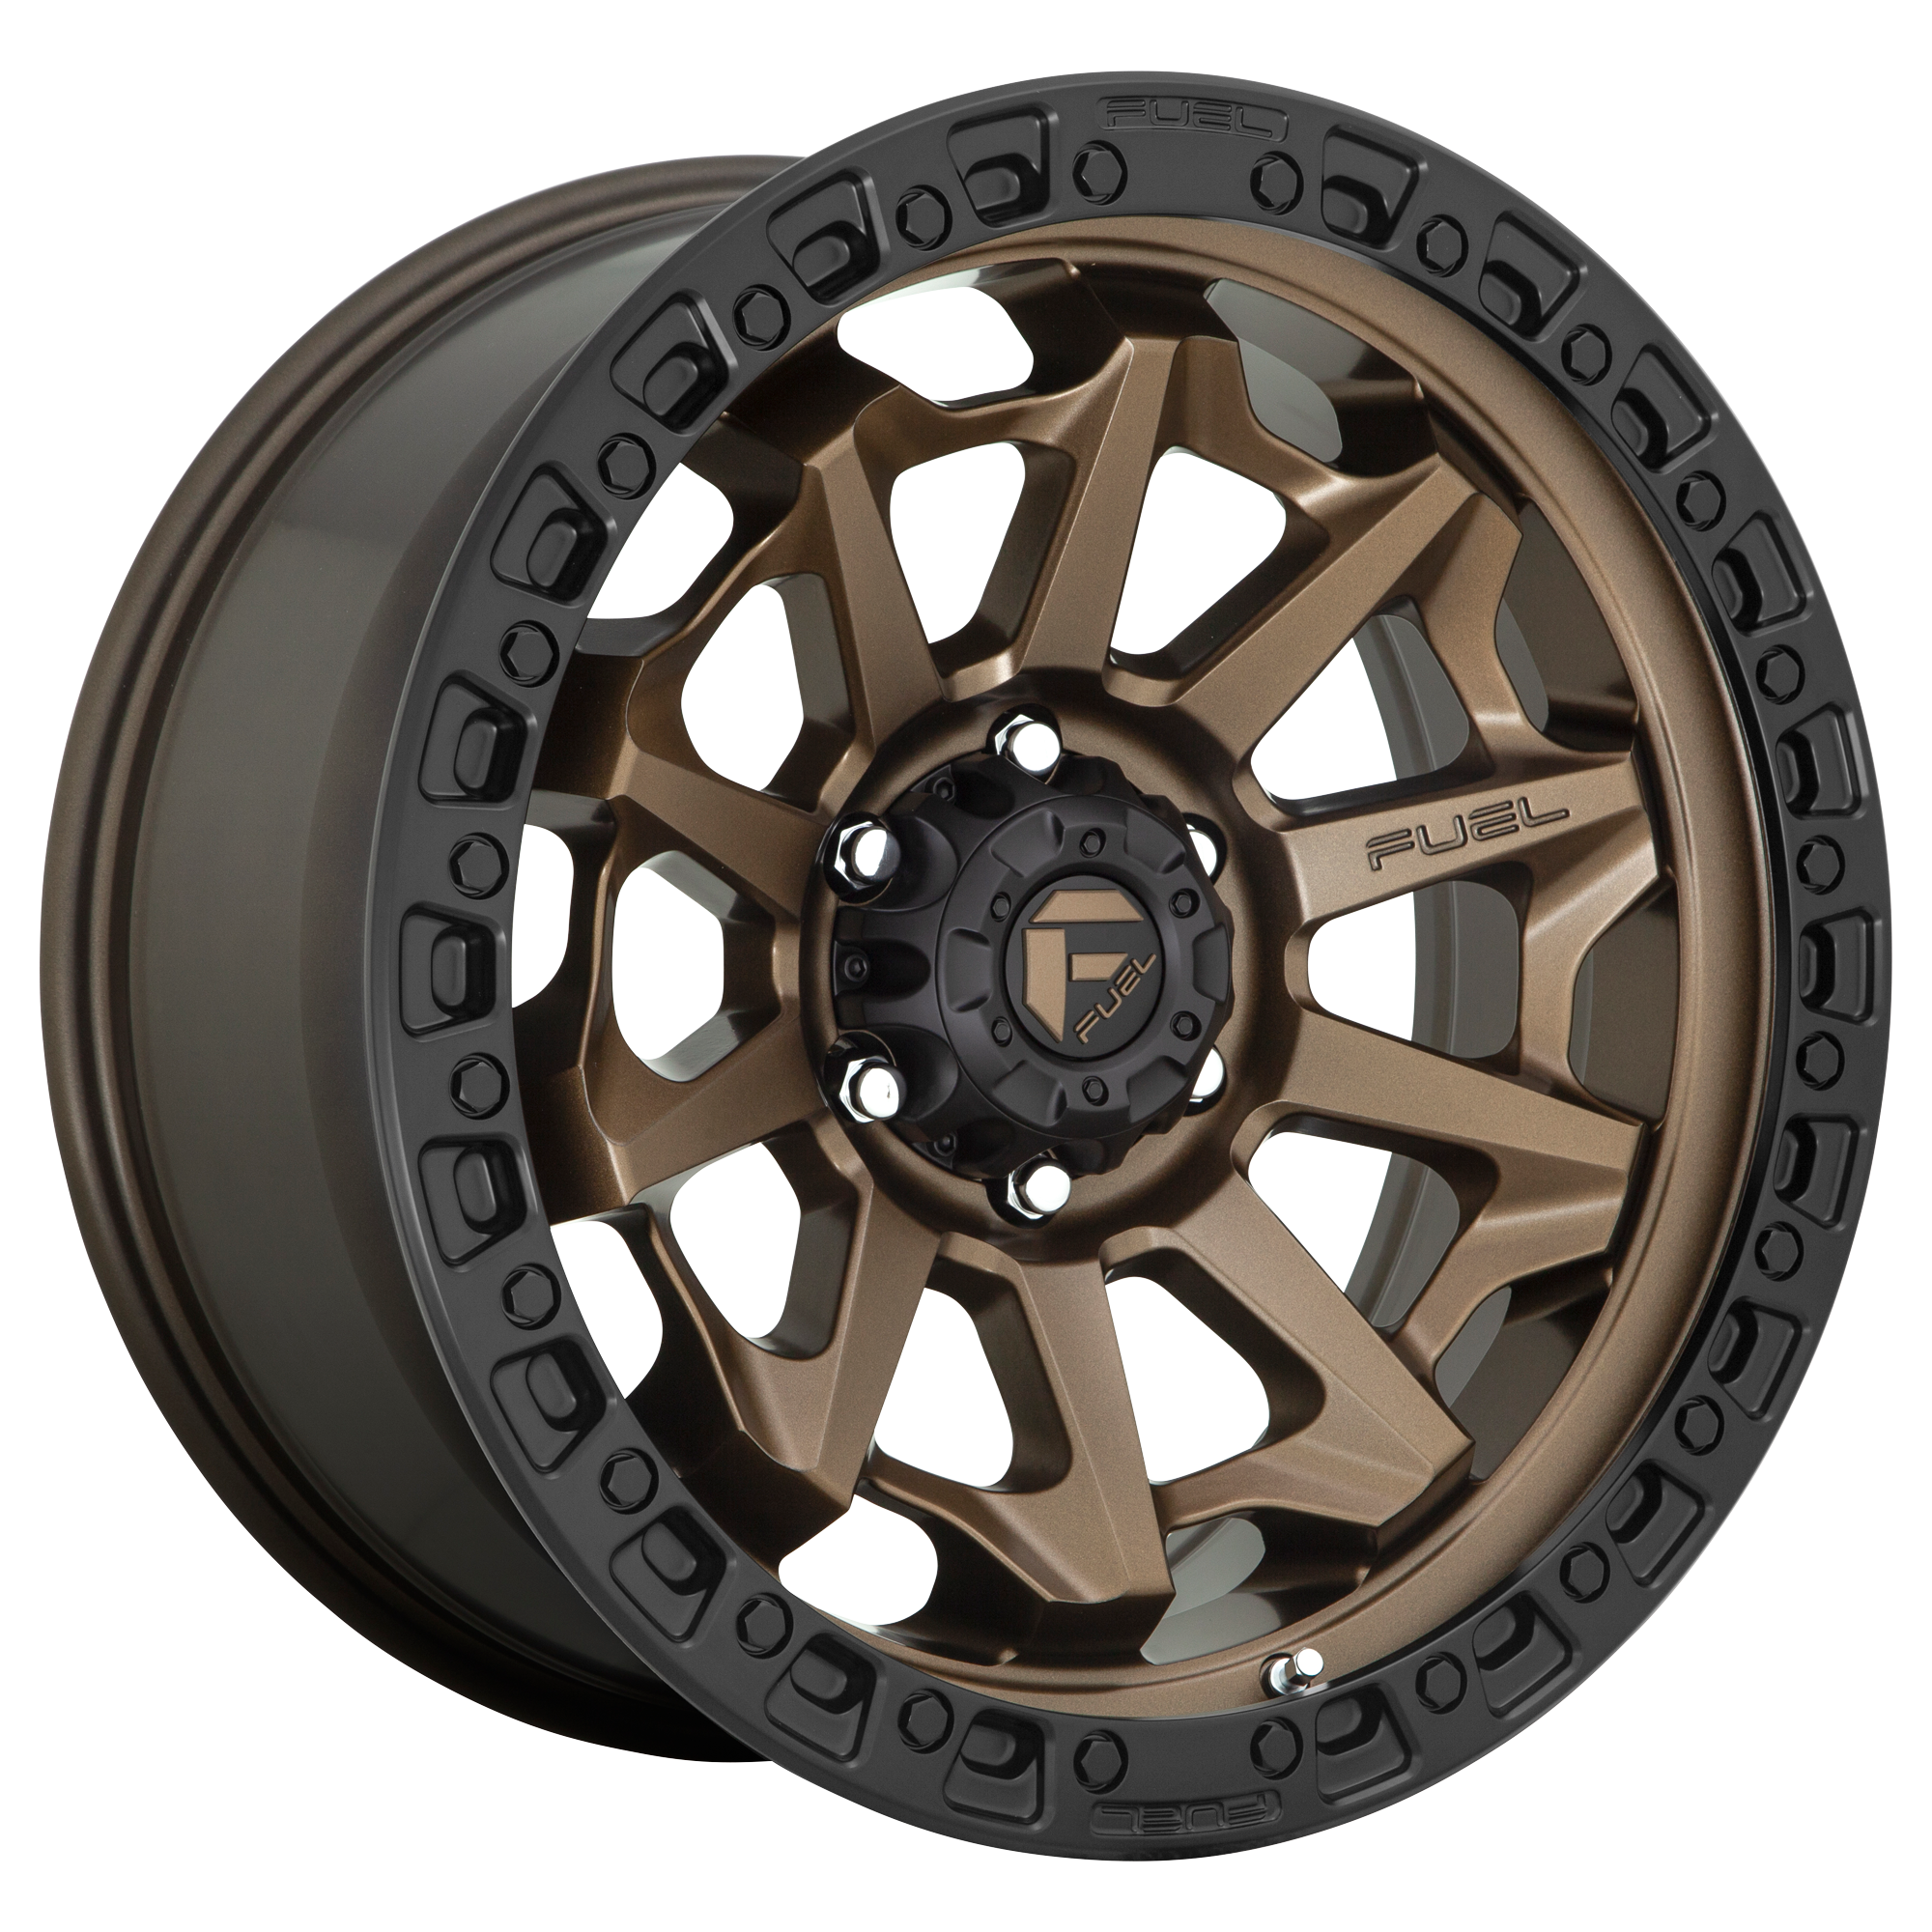 COVERT 20x9 6x139.70 MATTE BRONZE BLACK BEAD RING (20 mm) - Tires and Engine Performance